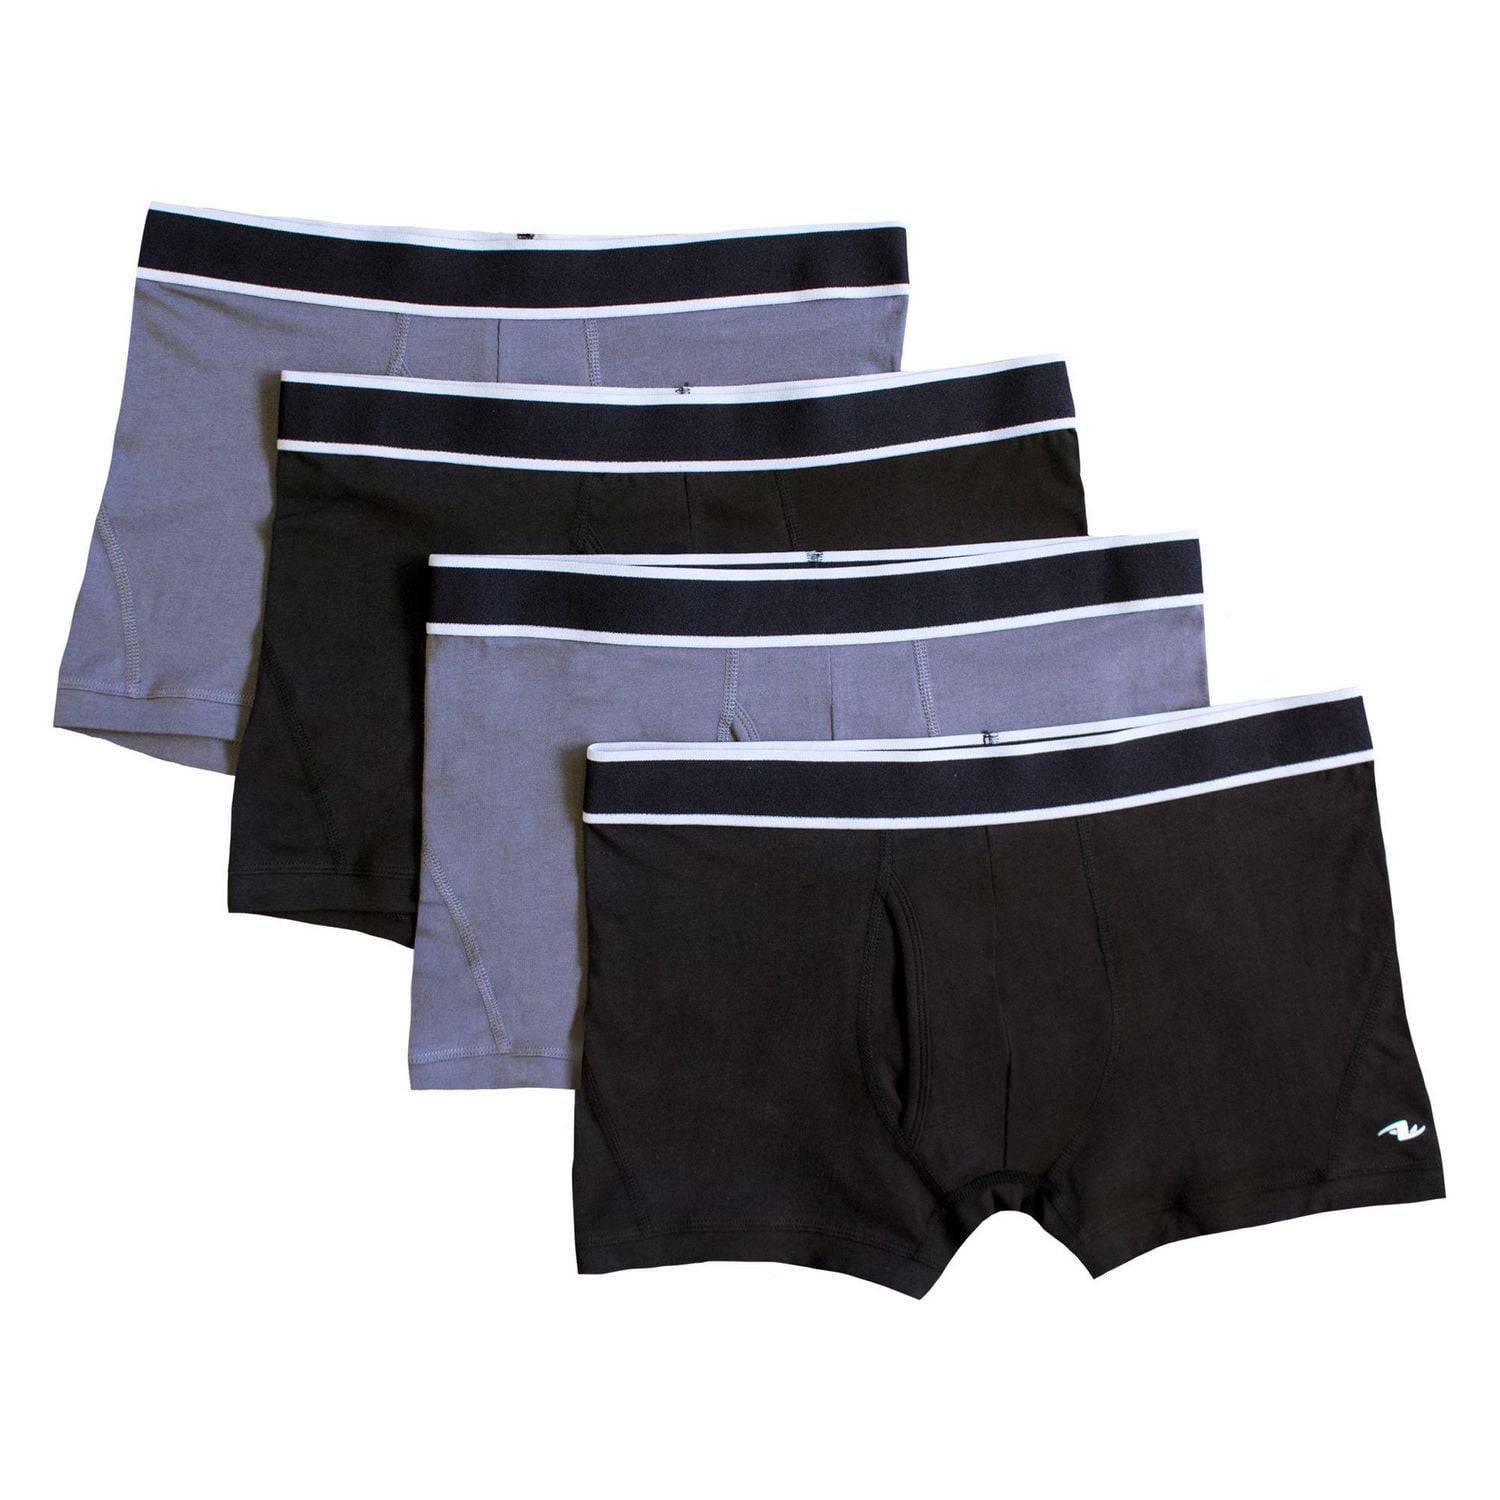 Underwear For Men Explains: Why Do You Need Athletic Underwear?